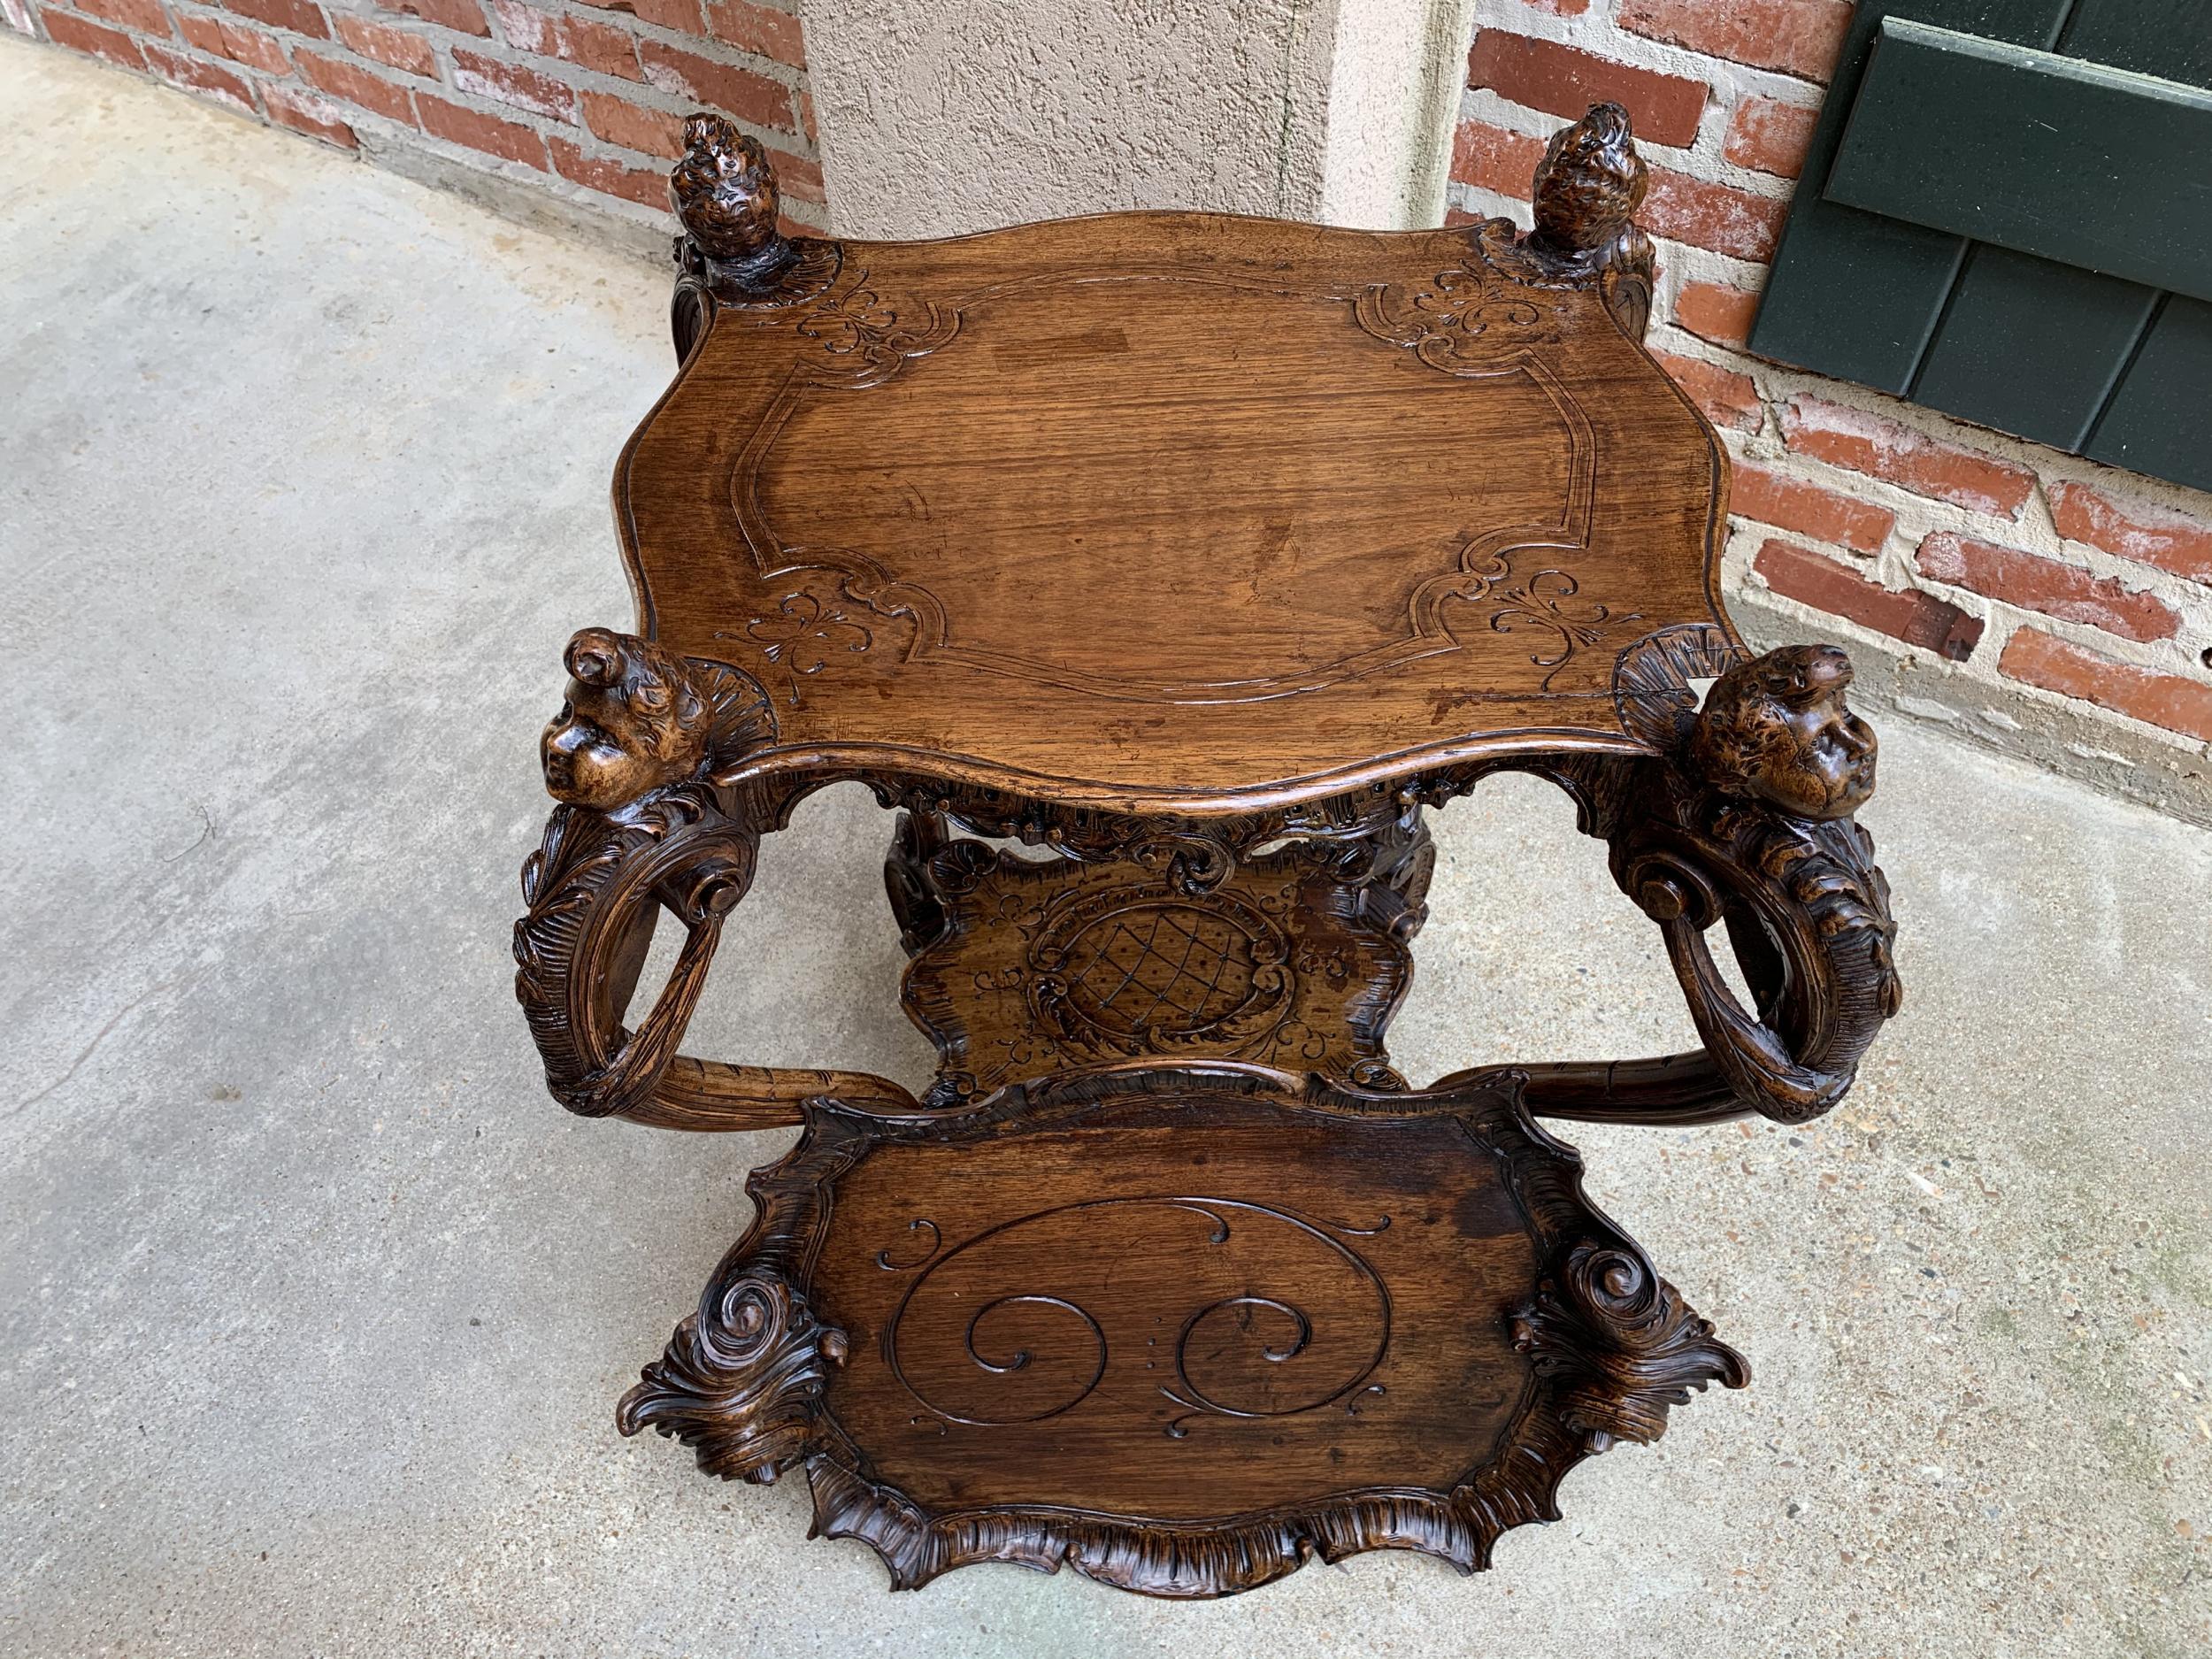 19th century French Carved Oak Sofa Dessert Table Serving Tray Louis XV Cherub For Sale 6